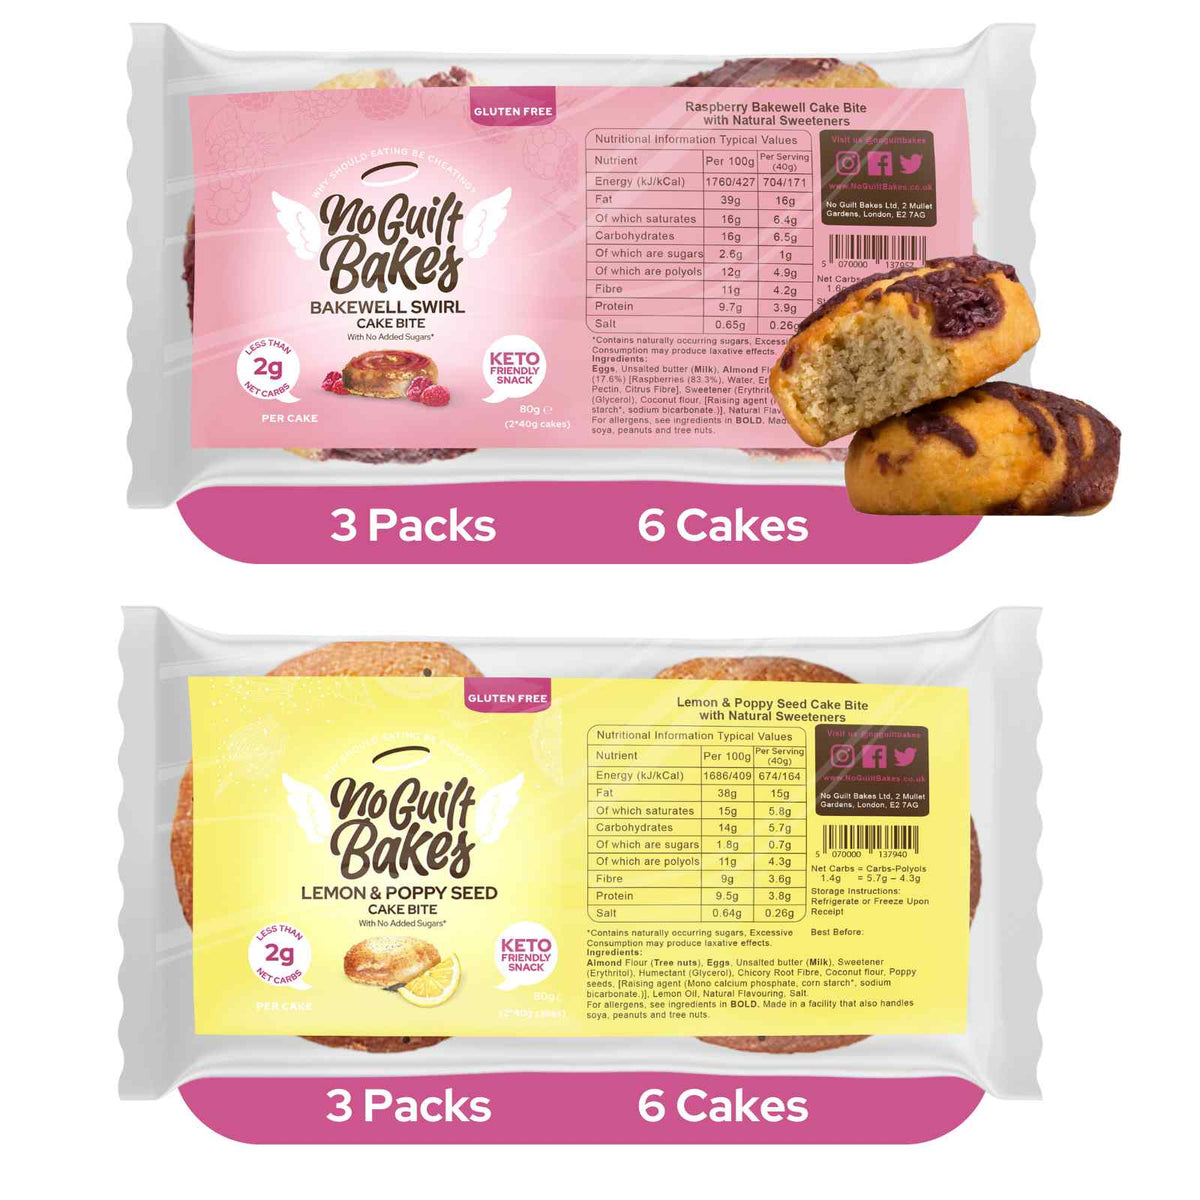 A package of No Guilt Bakes&#39; Fruity Variety Cake Bite Pack with a variety of flavors including lemon &amp; poppy seed.